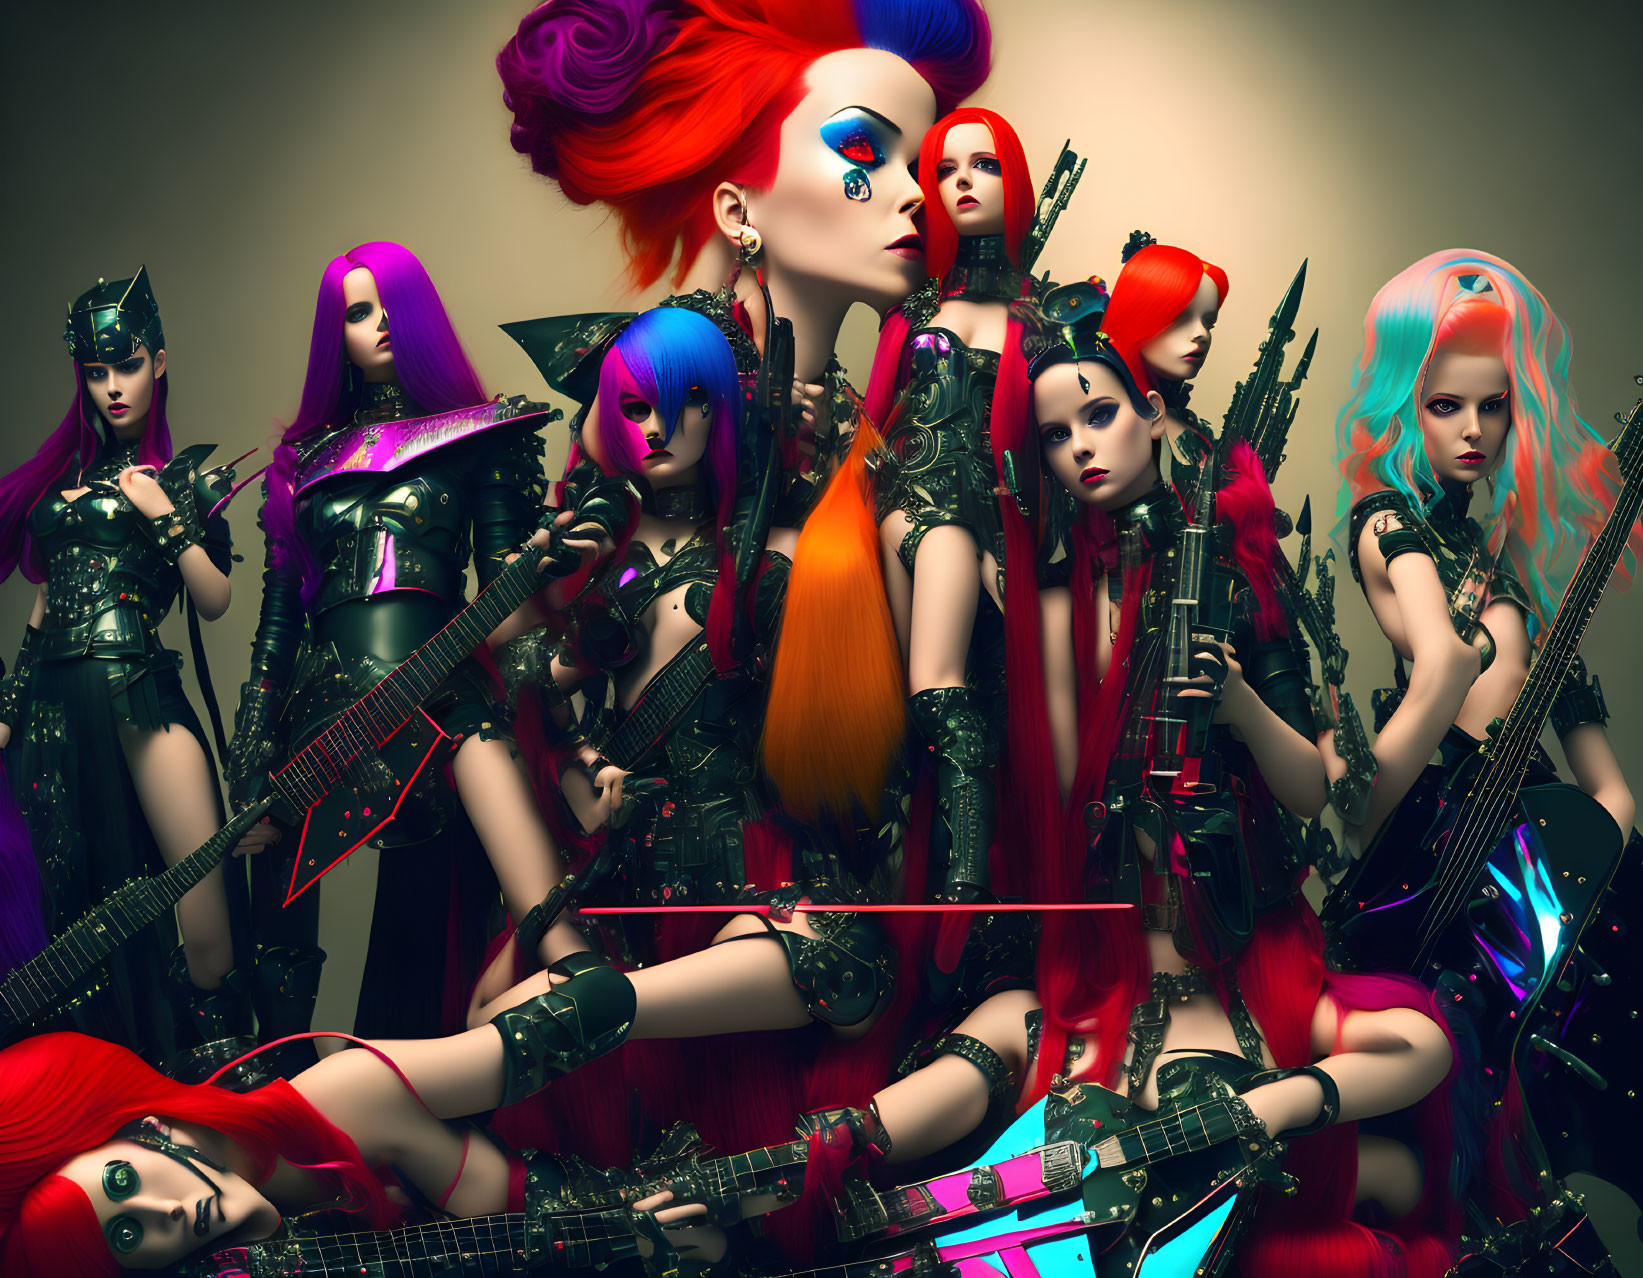 Futuristic female warriors with vibrant hair and elaborate armor in dramatic pose